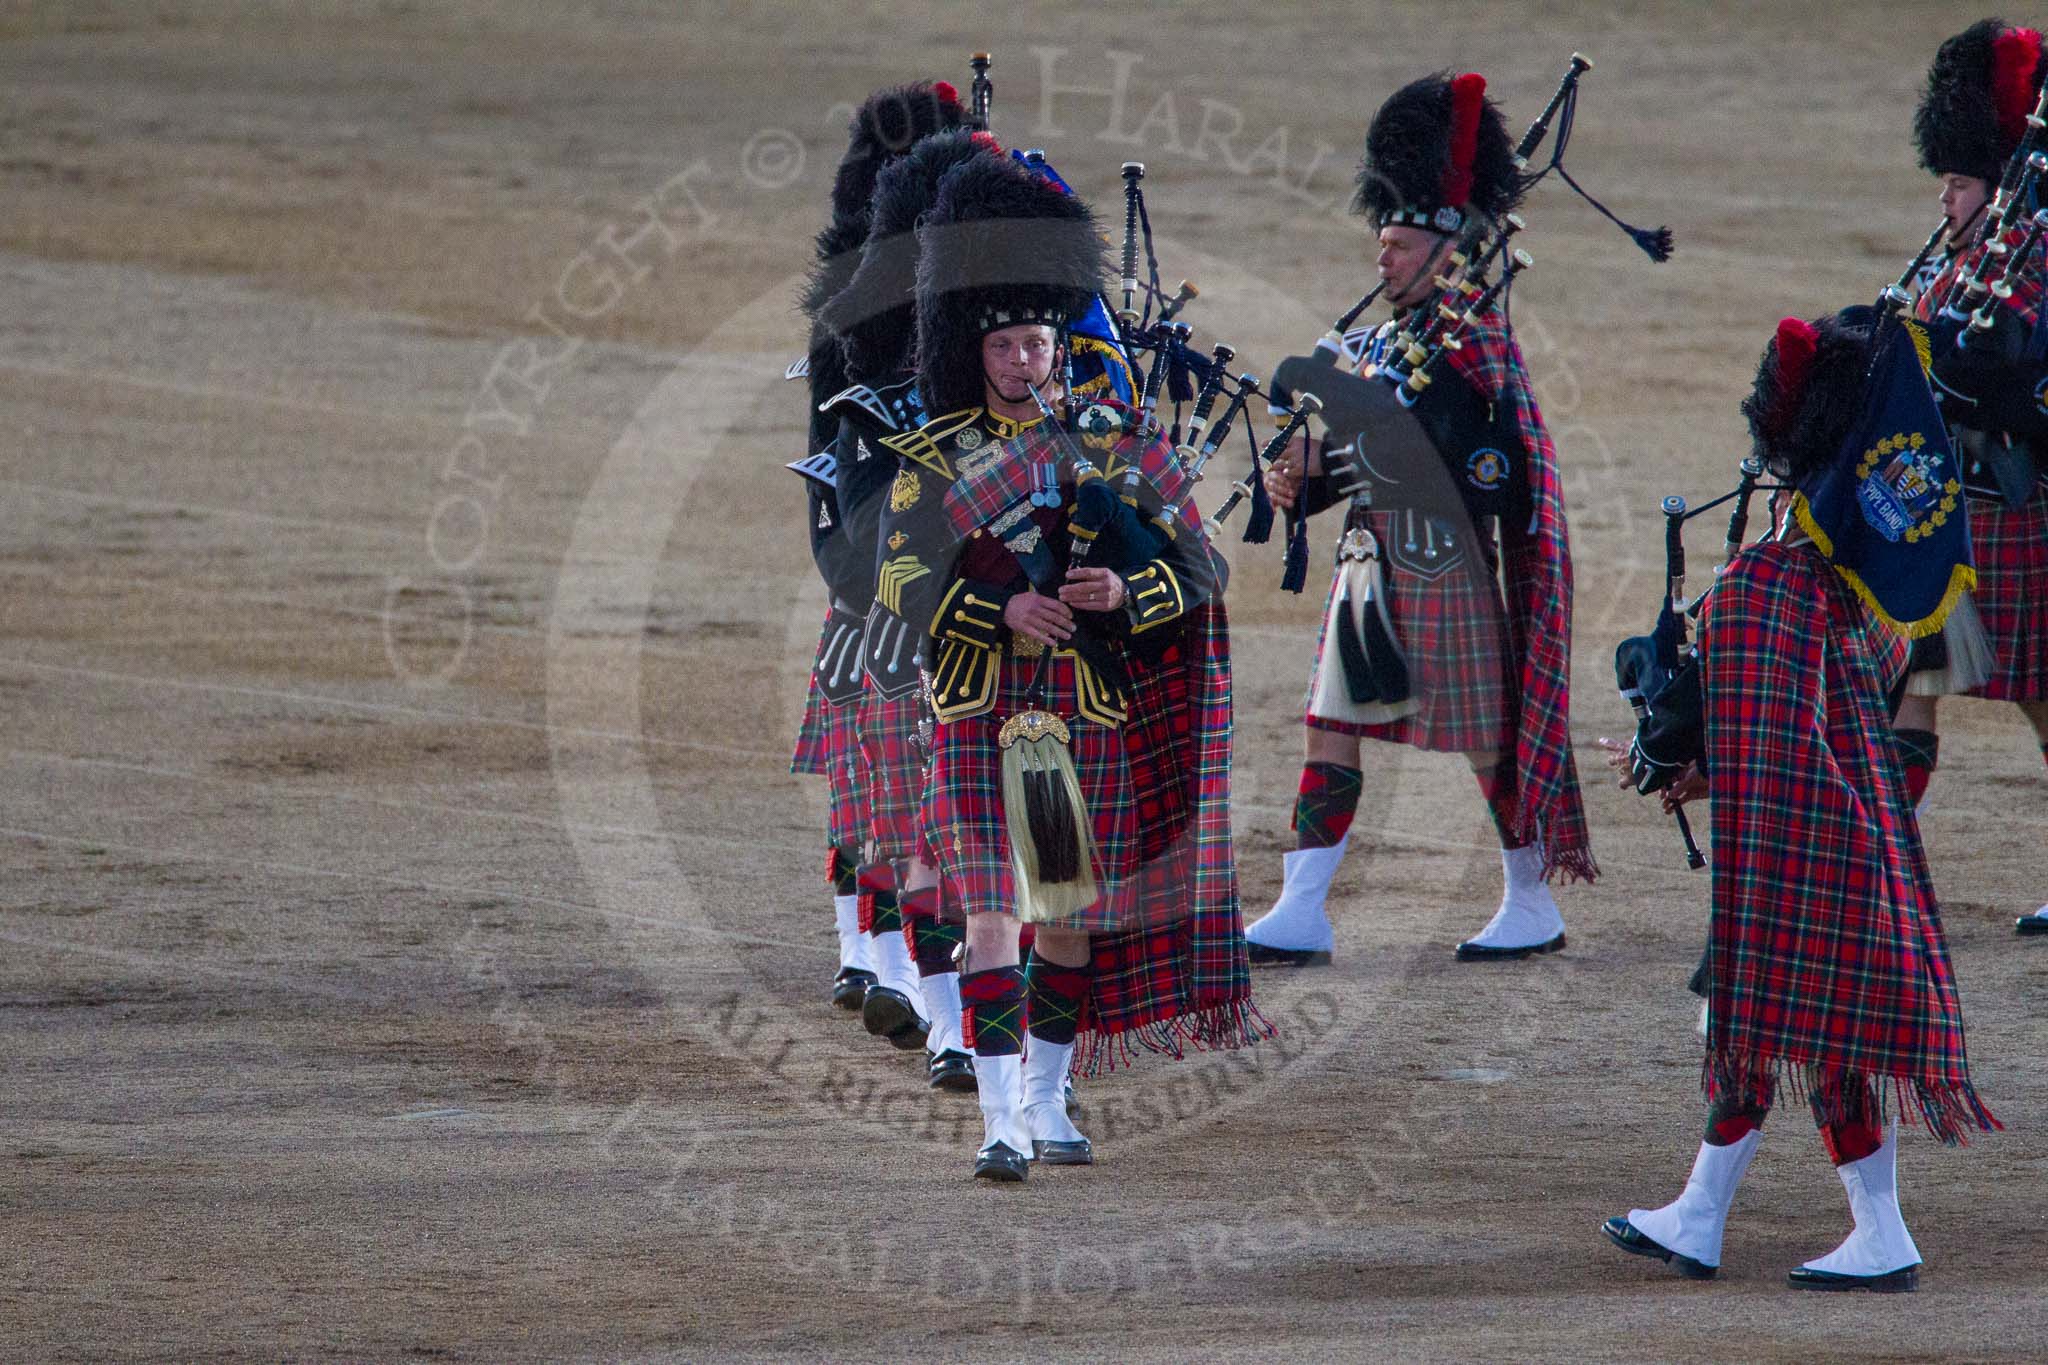 Beating Retreat 2014.
Horse Guards Parade, Westminster,
London SW1A,

United Kingdom,
on 11 June 2014 at 21:16, image #298